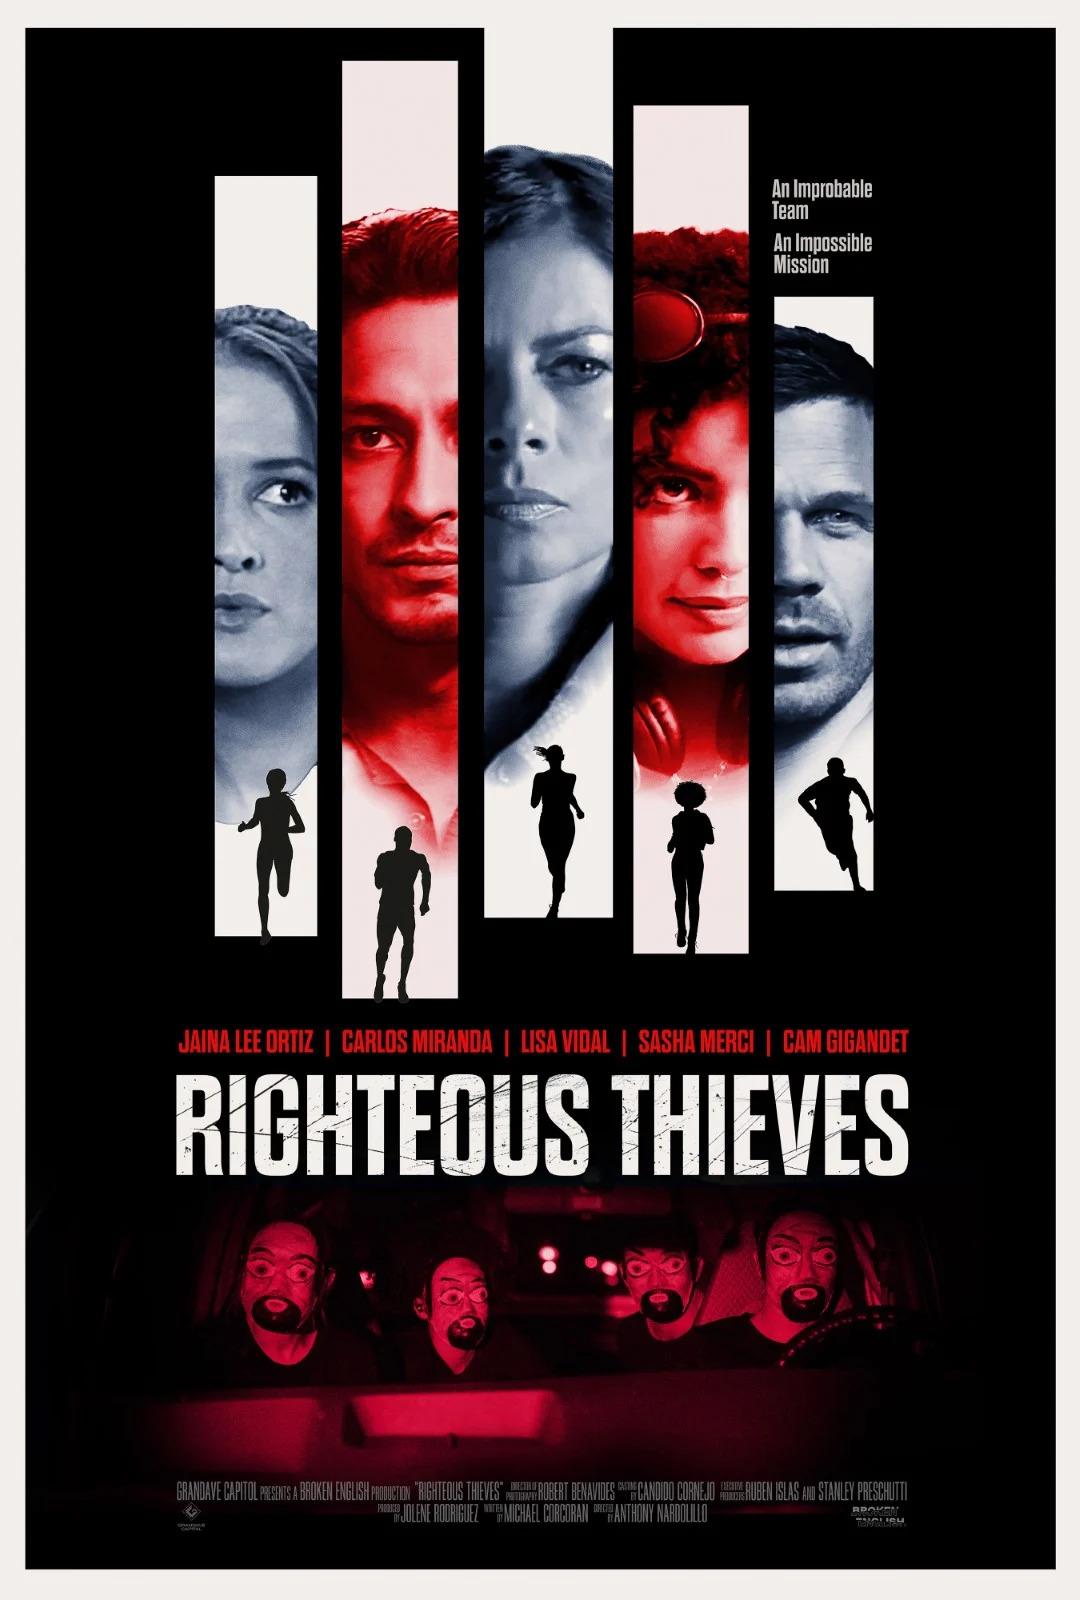 Righteous Thieves Trailer & Poster